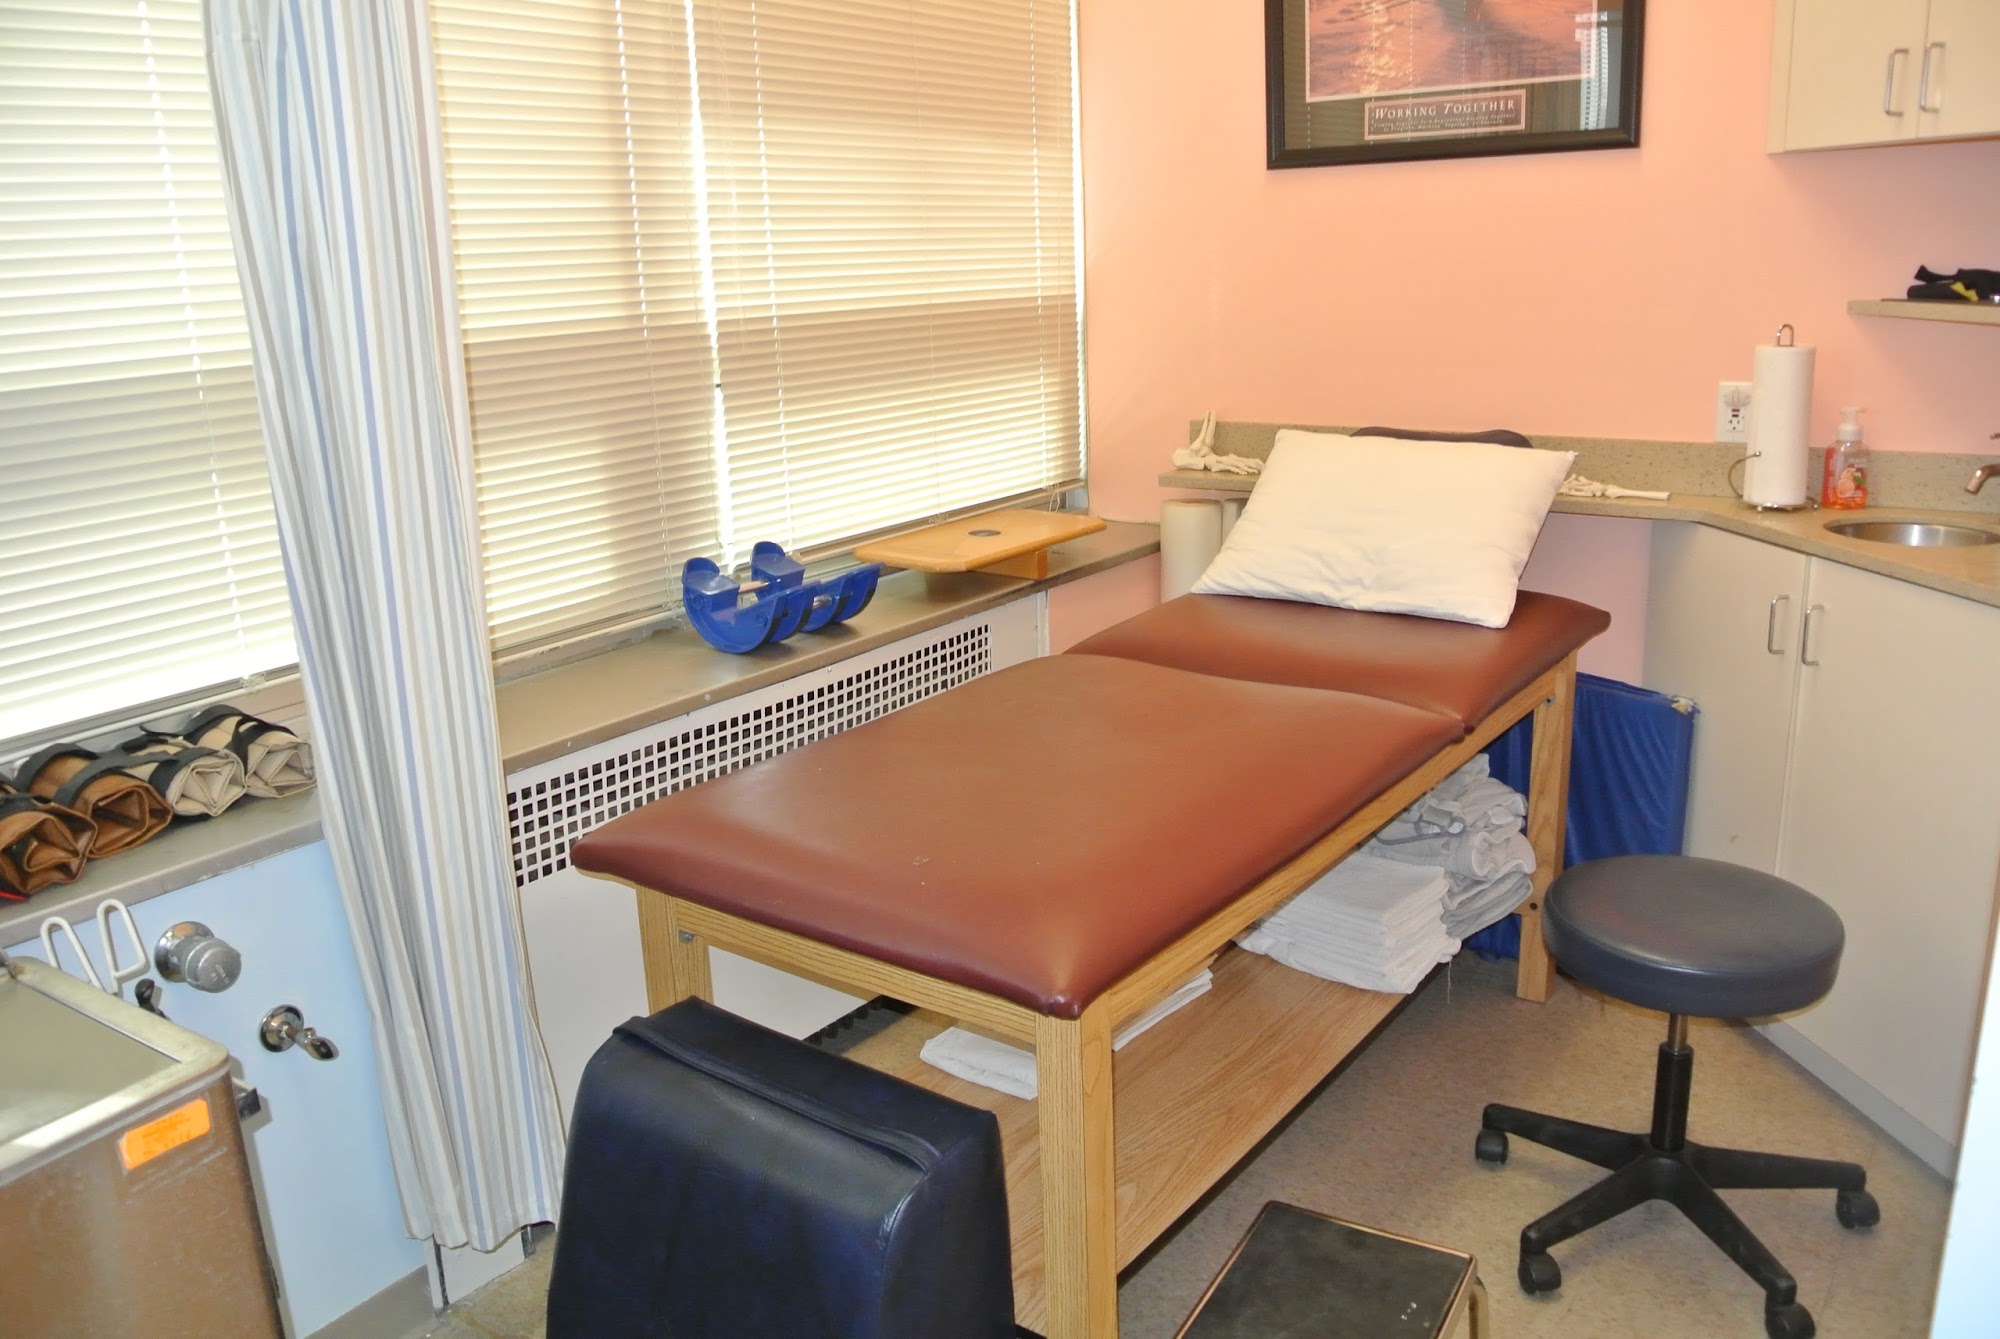 Acosta Physical Therapy 61-34 188th St Ste 208, Fresh Meadows New York 11365